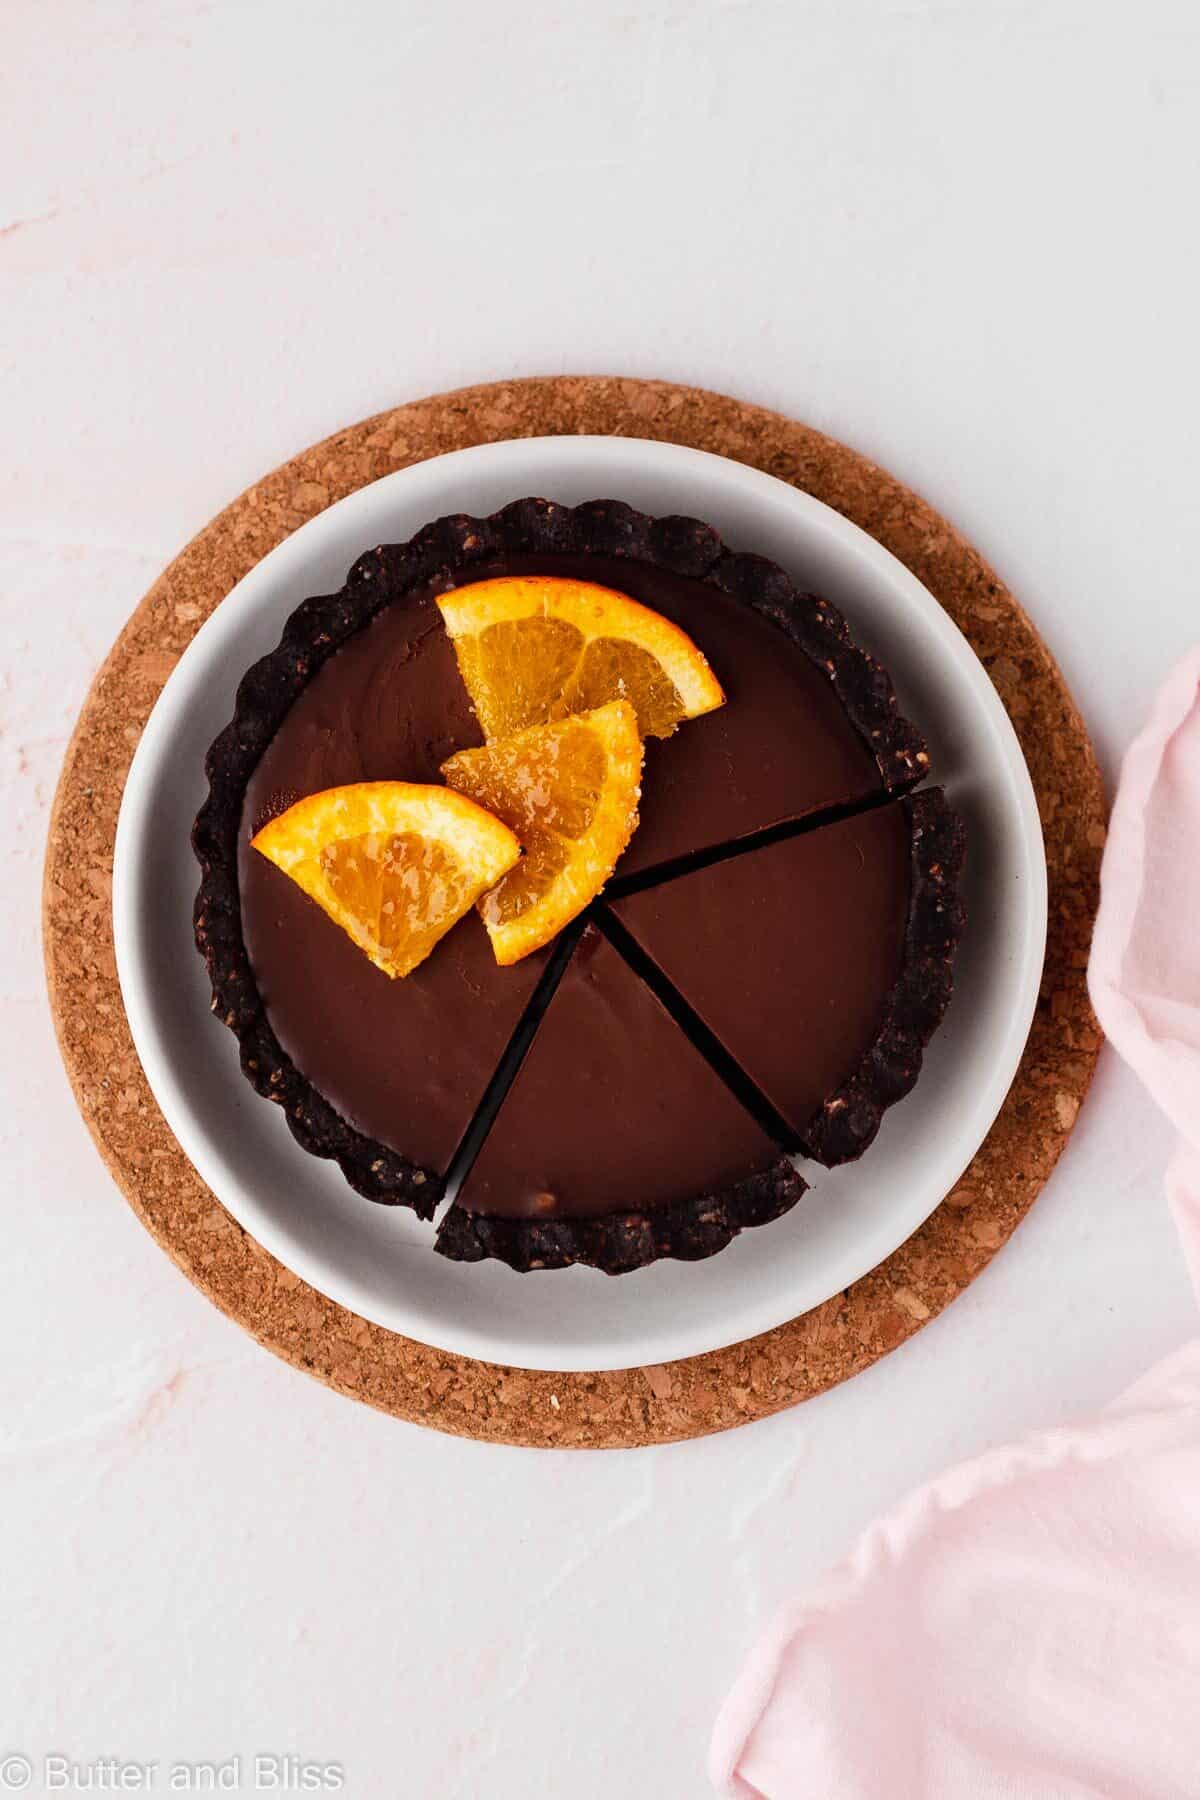 A mini gluten free chocolate orange tart with slices cut on a small plate.